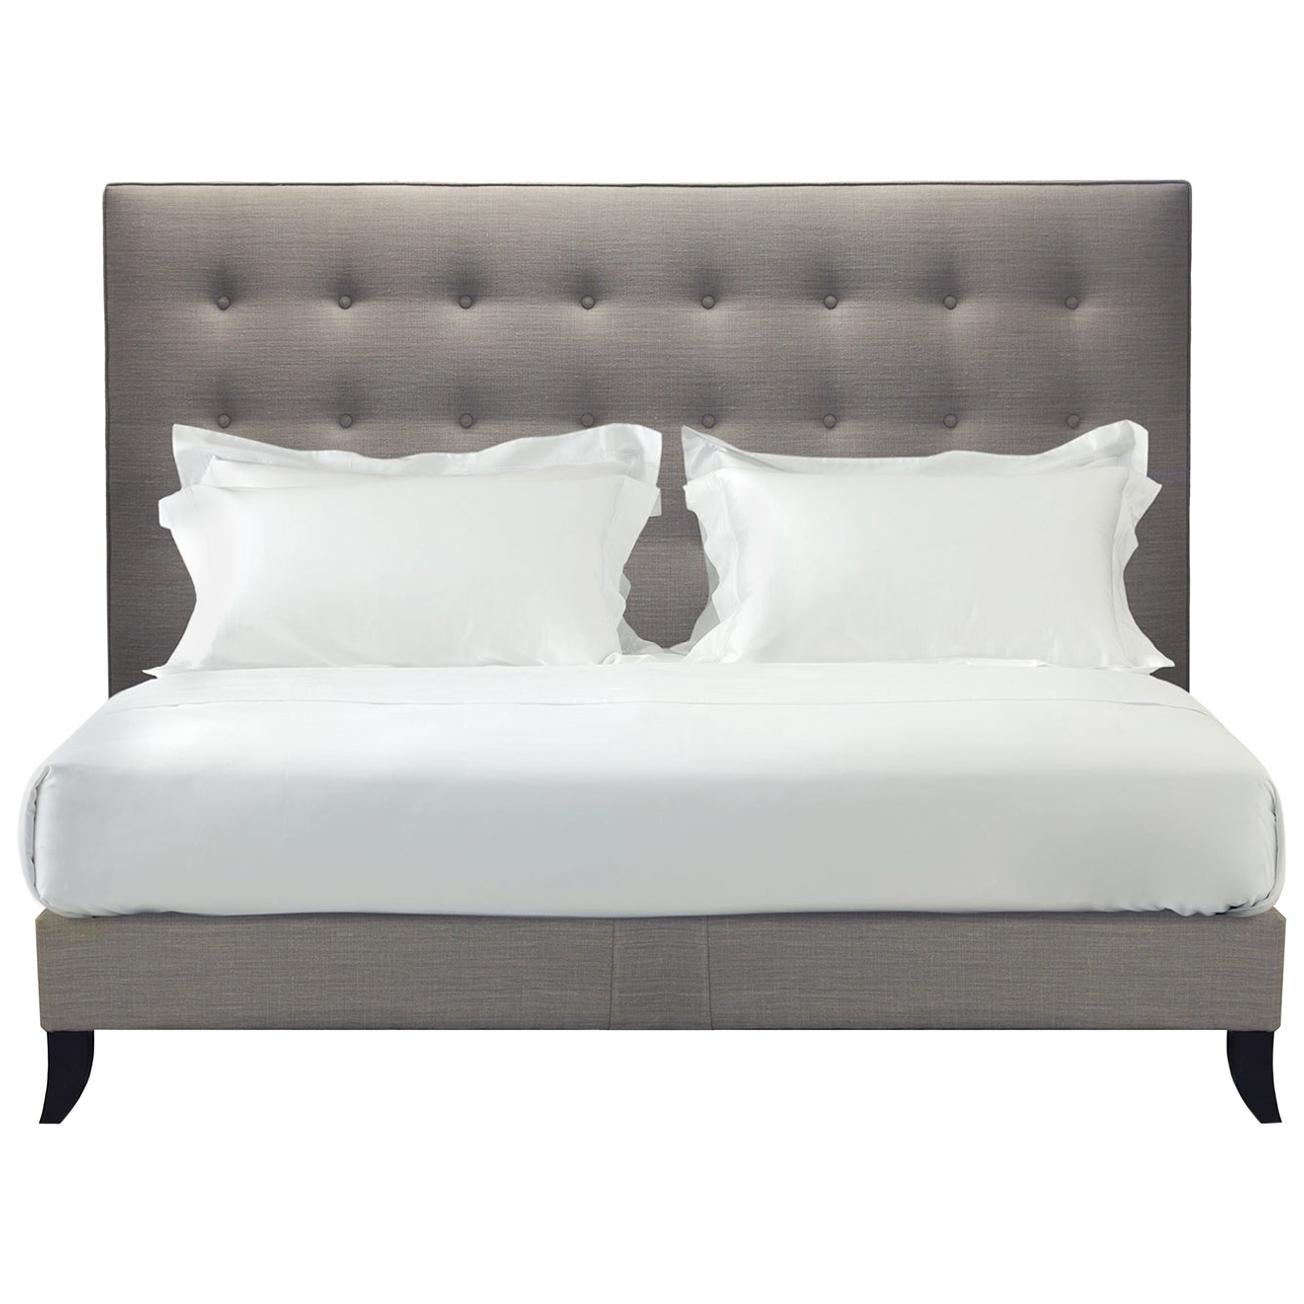 Savoir Holly Bed in Linen with Undulated Buttoning, Made to Order, US King Size For Sale